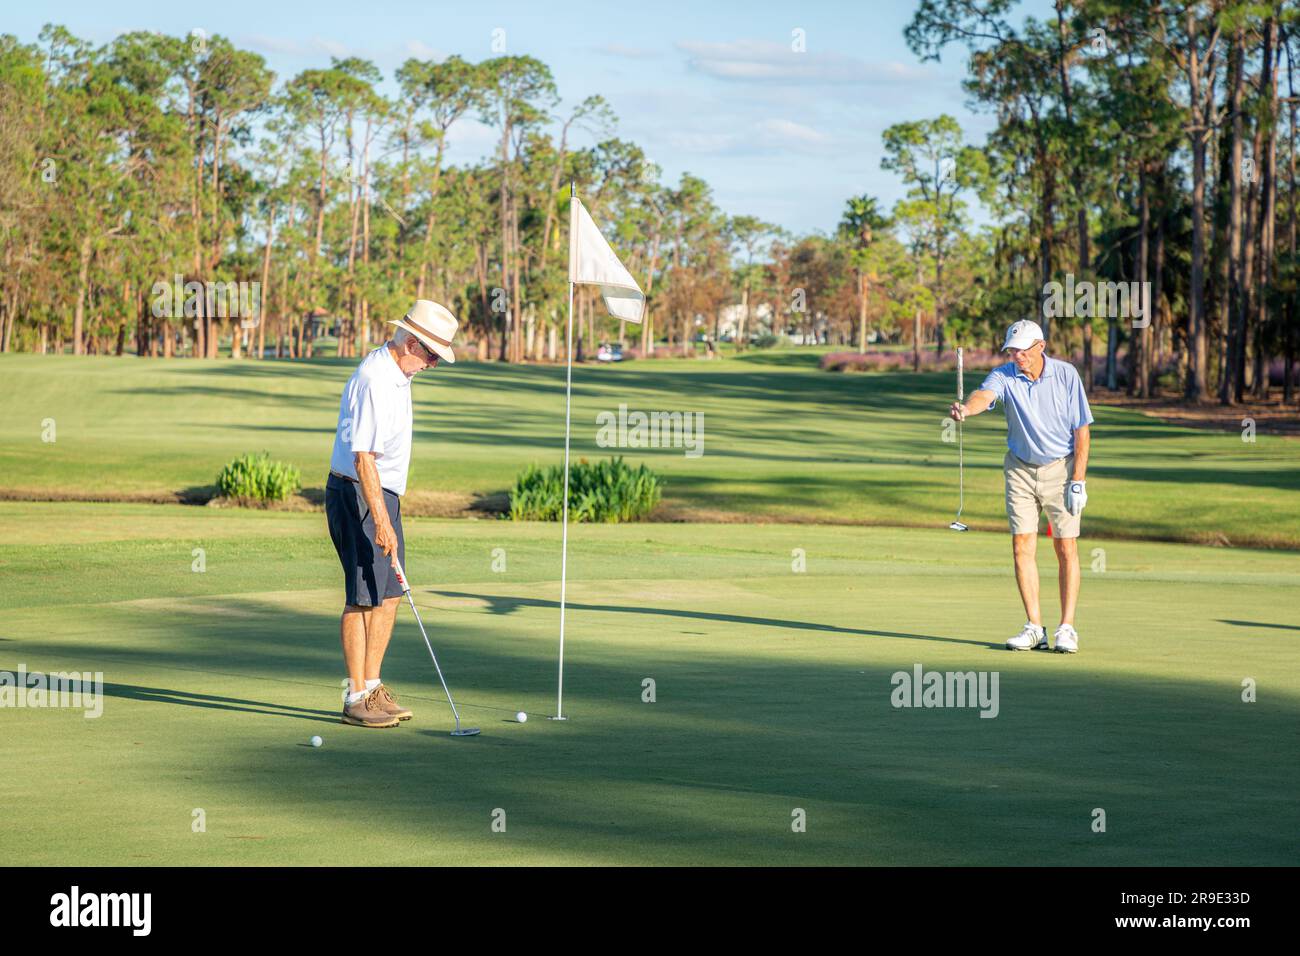 Two older men setting up a putt on the green, Quail Creek Country Club, Naples, Florida, USA Stock Photo